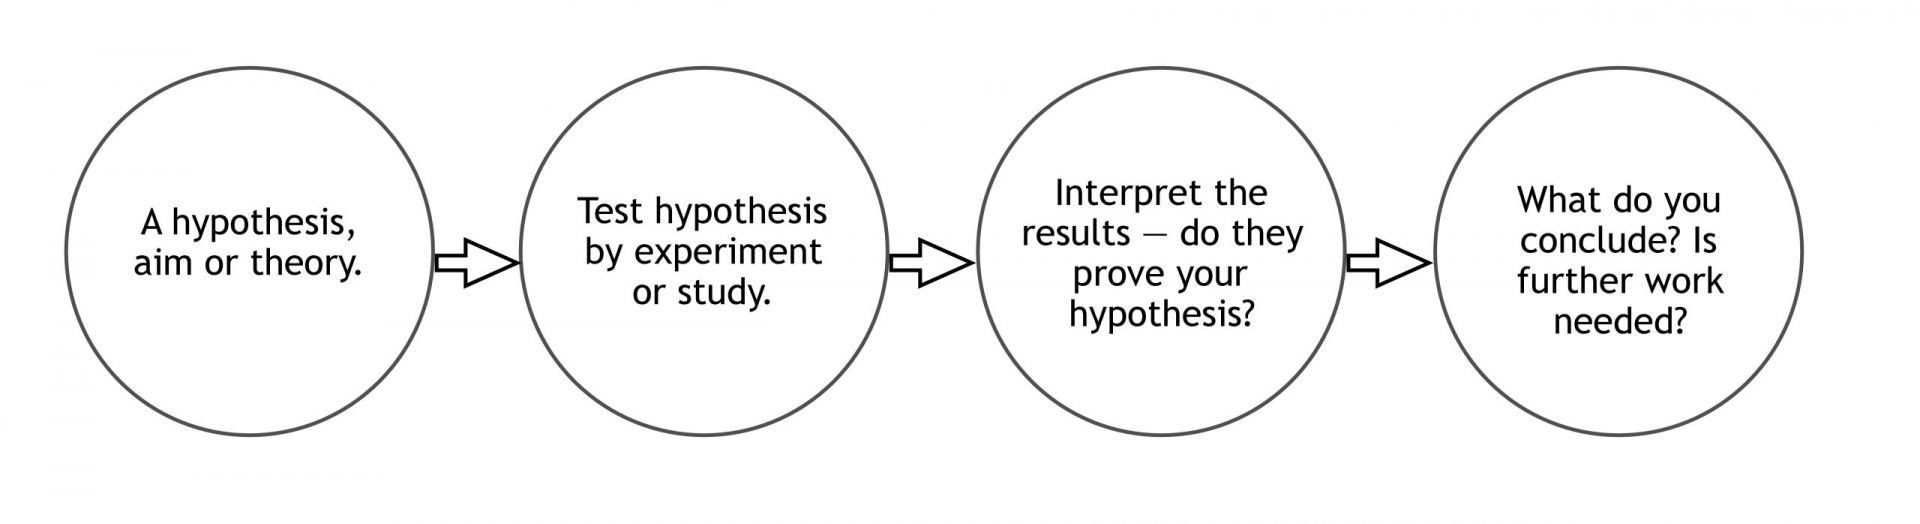 Scientific Method for conducting an experiment